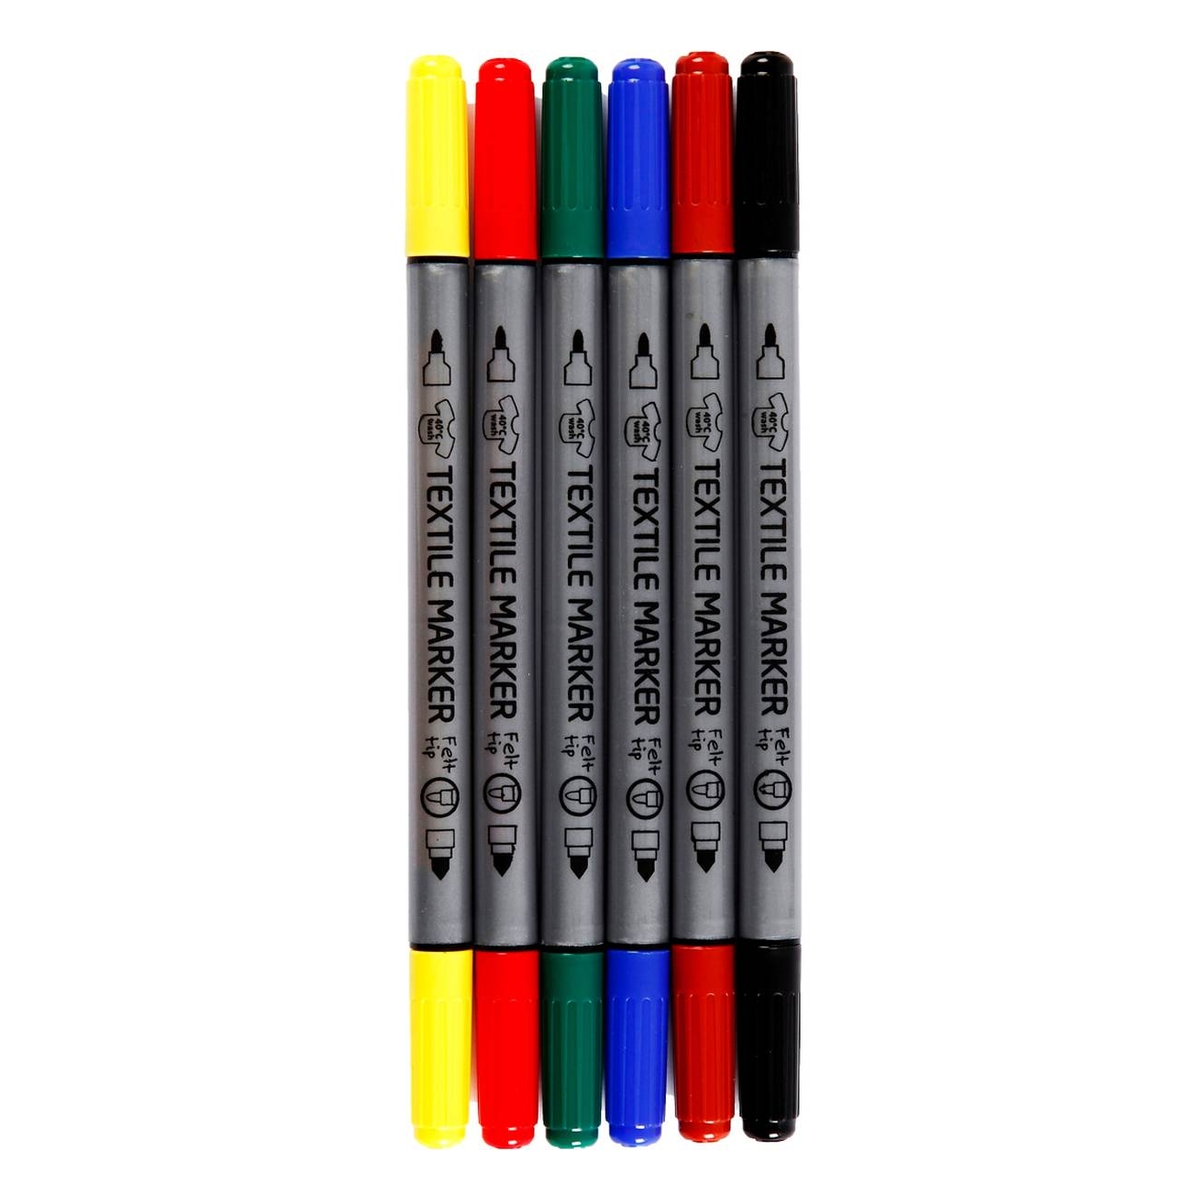 Colour Markers Basic 6 Pack